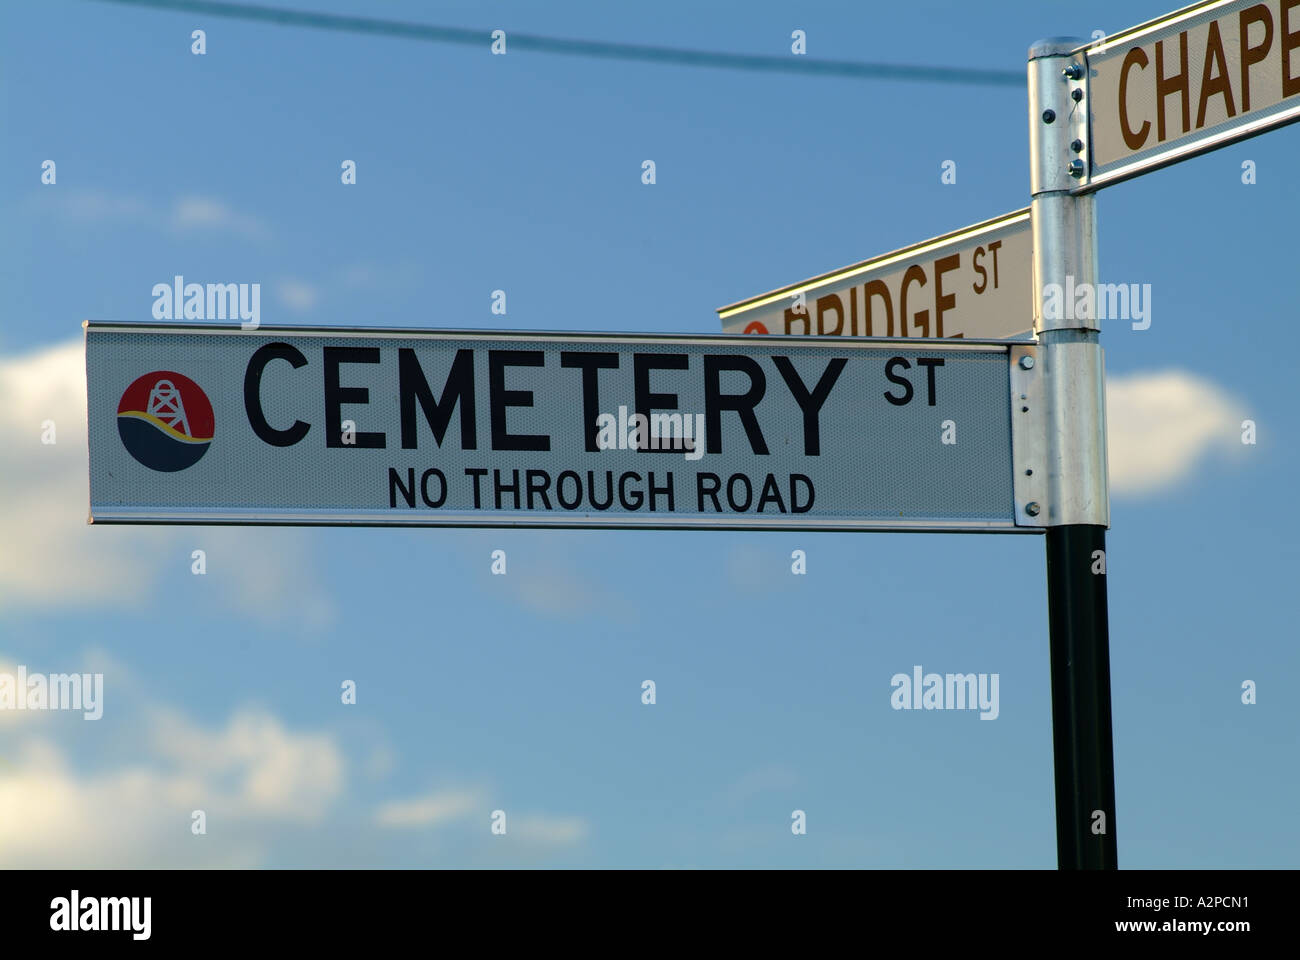 Cemetery Street road sign, no through road Stock Photo